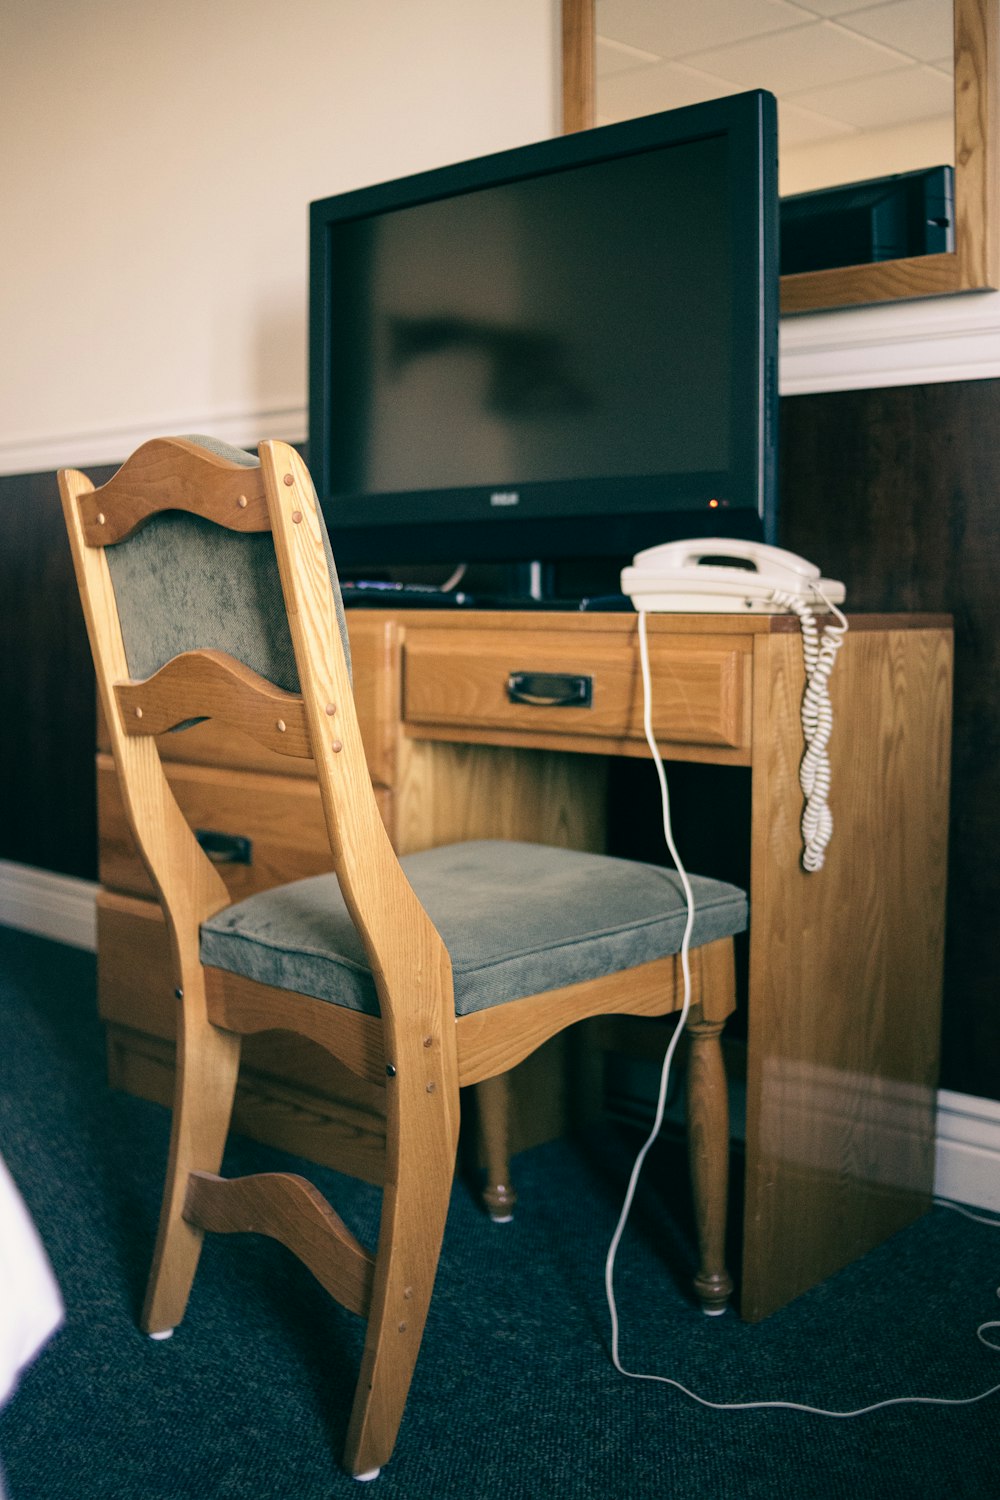 a wooden chair sitting in front of a tv